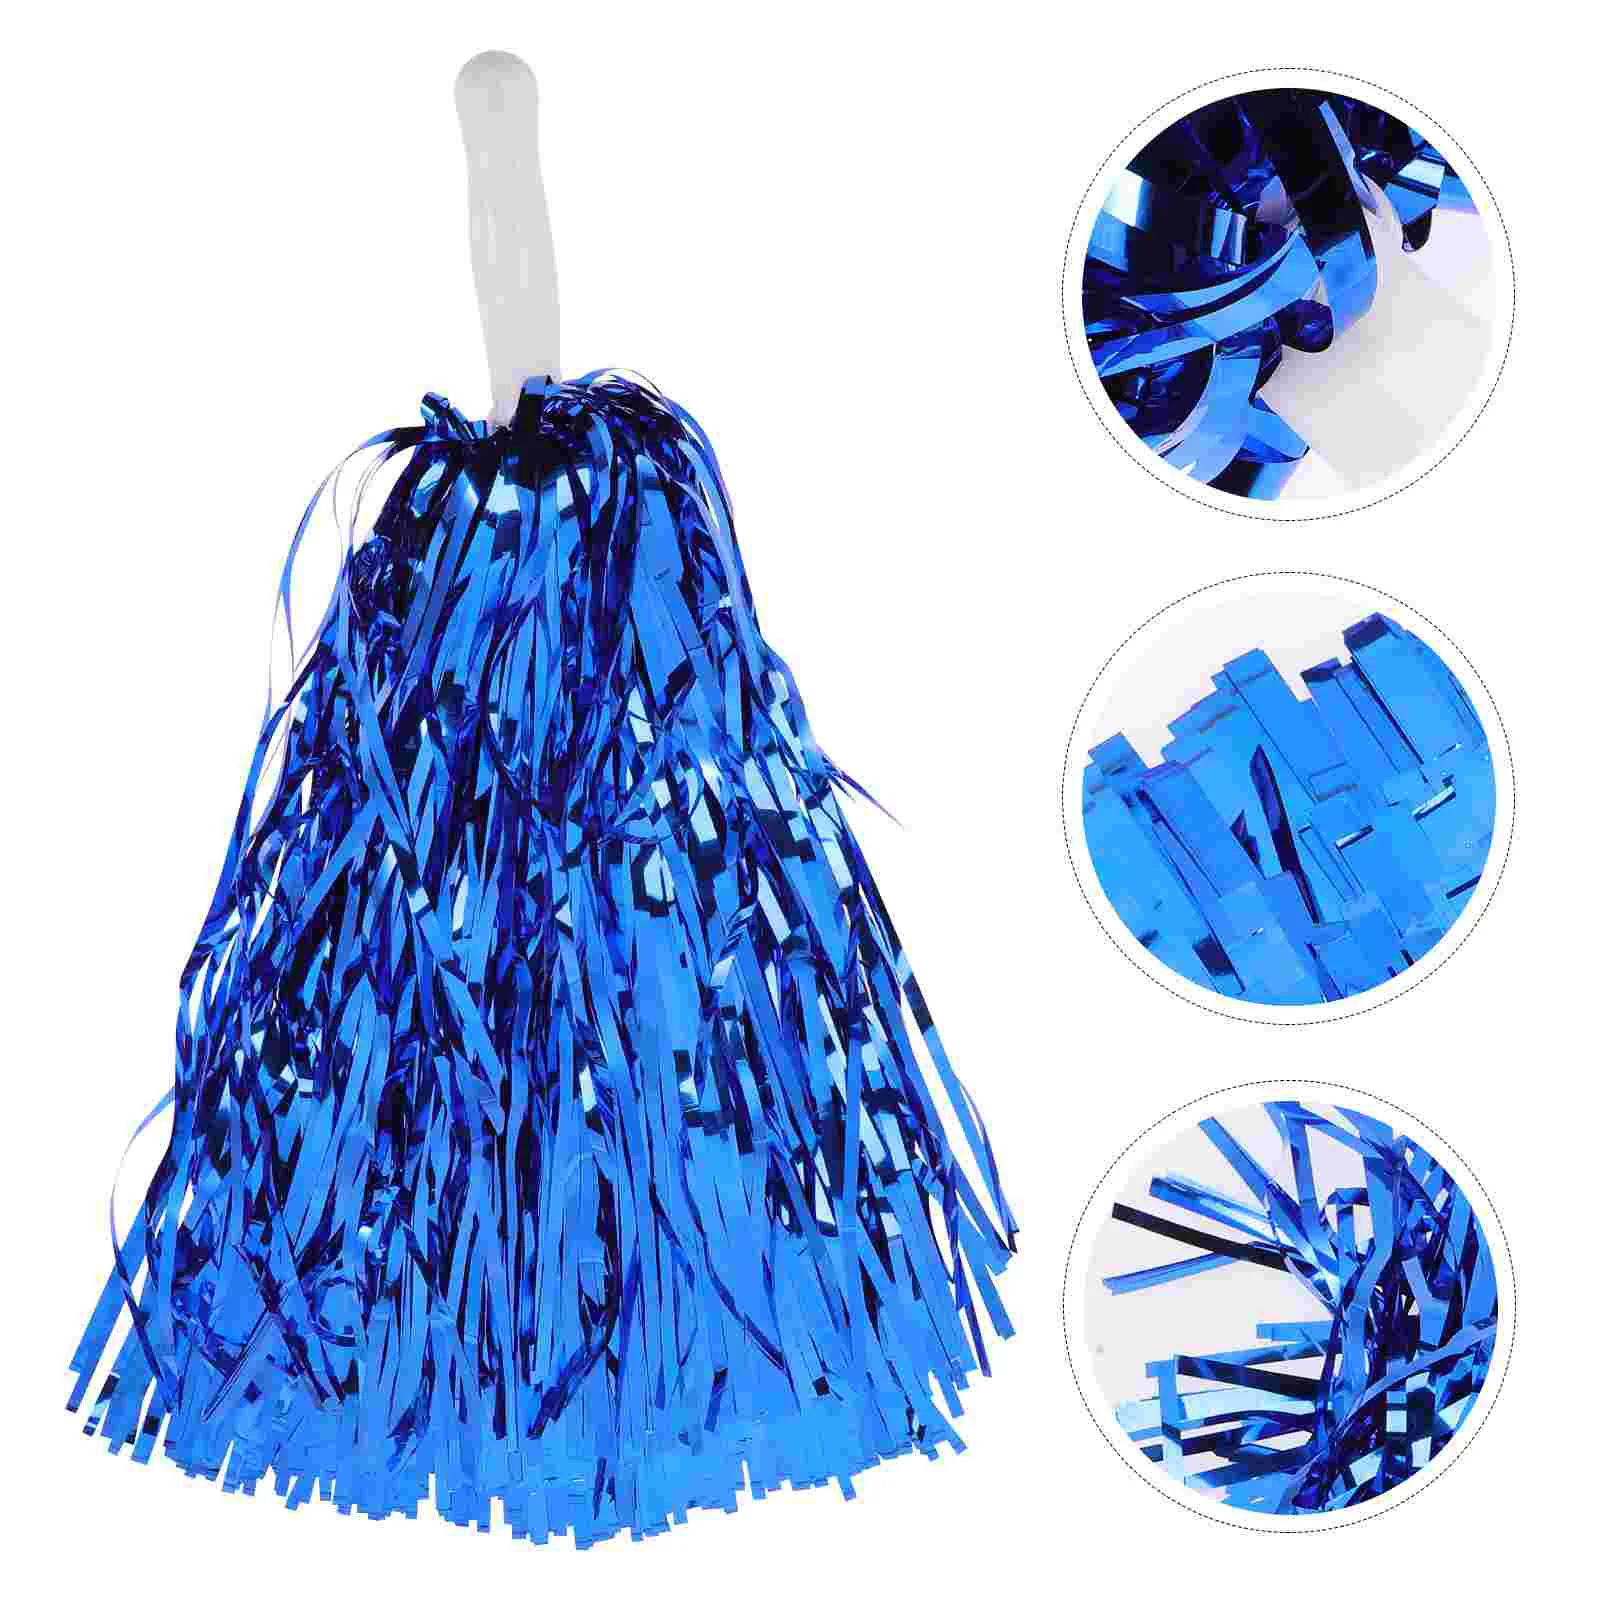 4pcs Cheerleader Pom Poms Cheerleading Cheering Props for Sports Game Dance Party